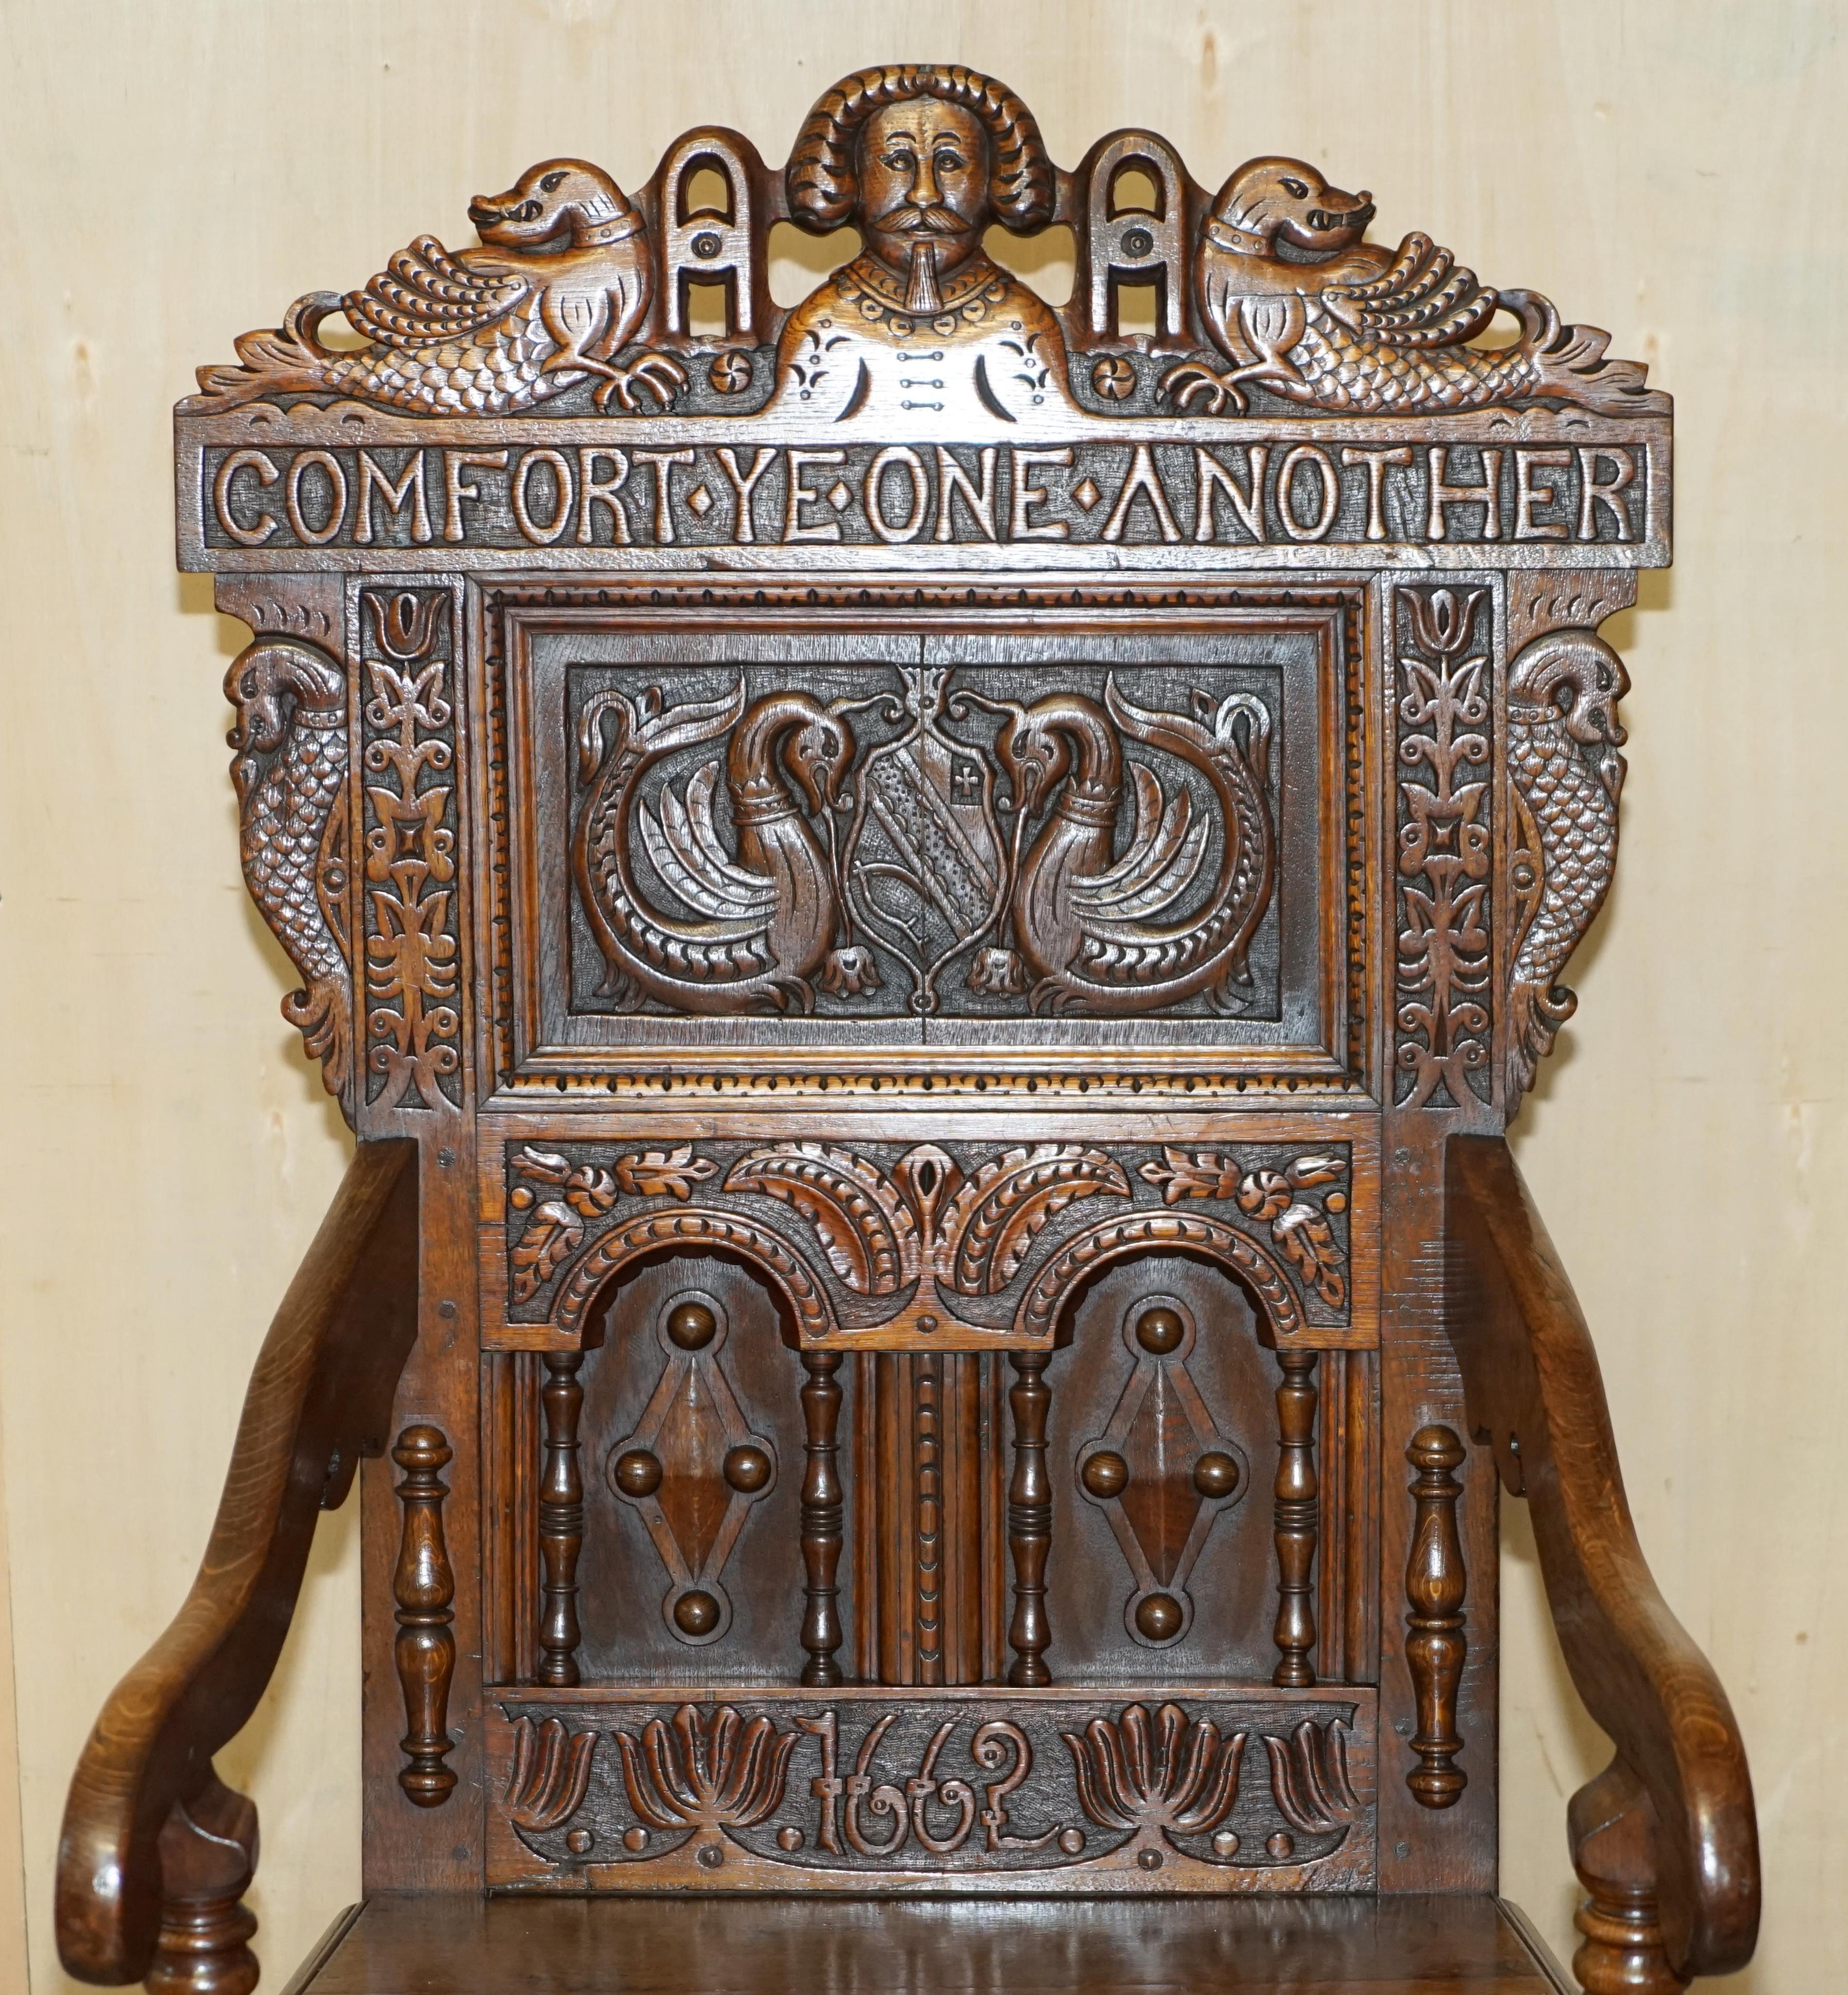 Jacobean ANTiQUE ENGLISH 1662 DATED COMFORT ONE ANOTHER CARVED WAINSCOTT THRONE ARMCHAIR For Sale